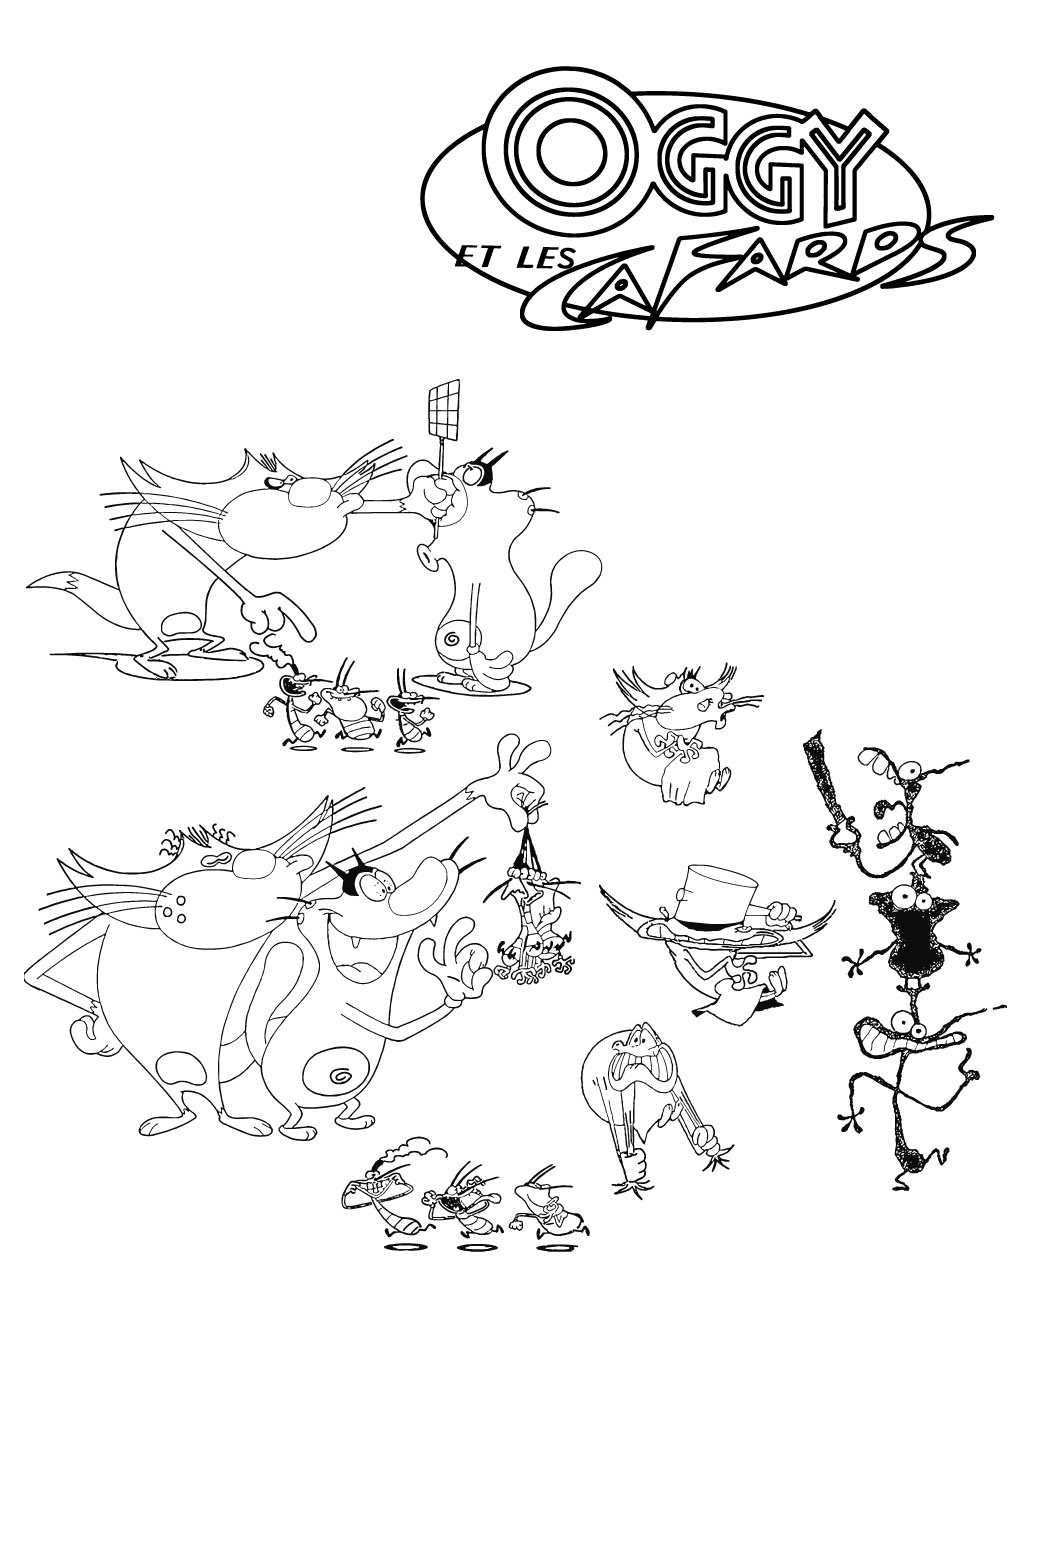 Coloring page: Oggy and the Cockroaches (Cartoons) #37911 - Free Printable Coloring Pages